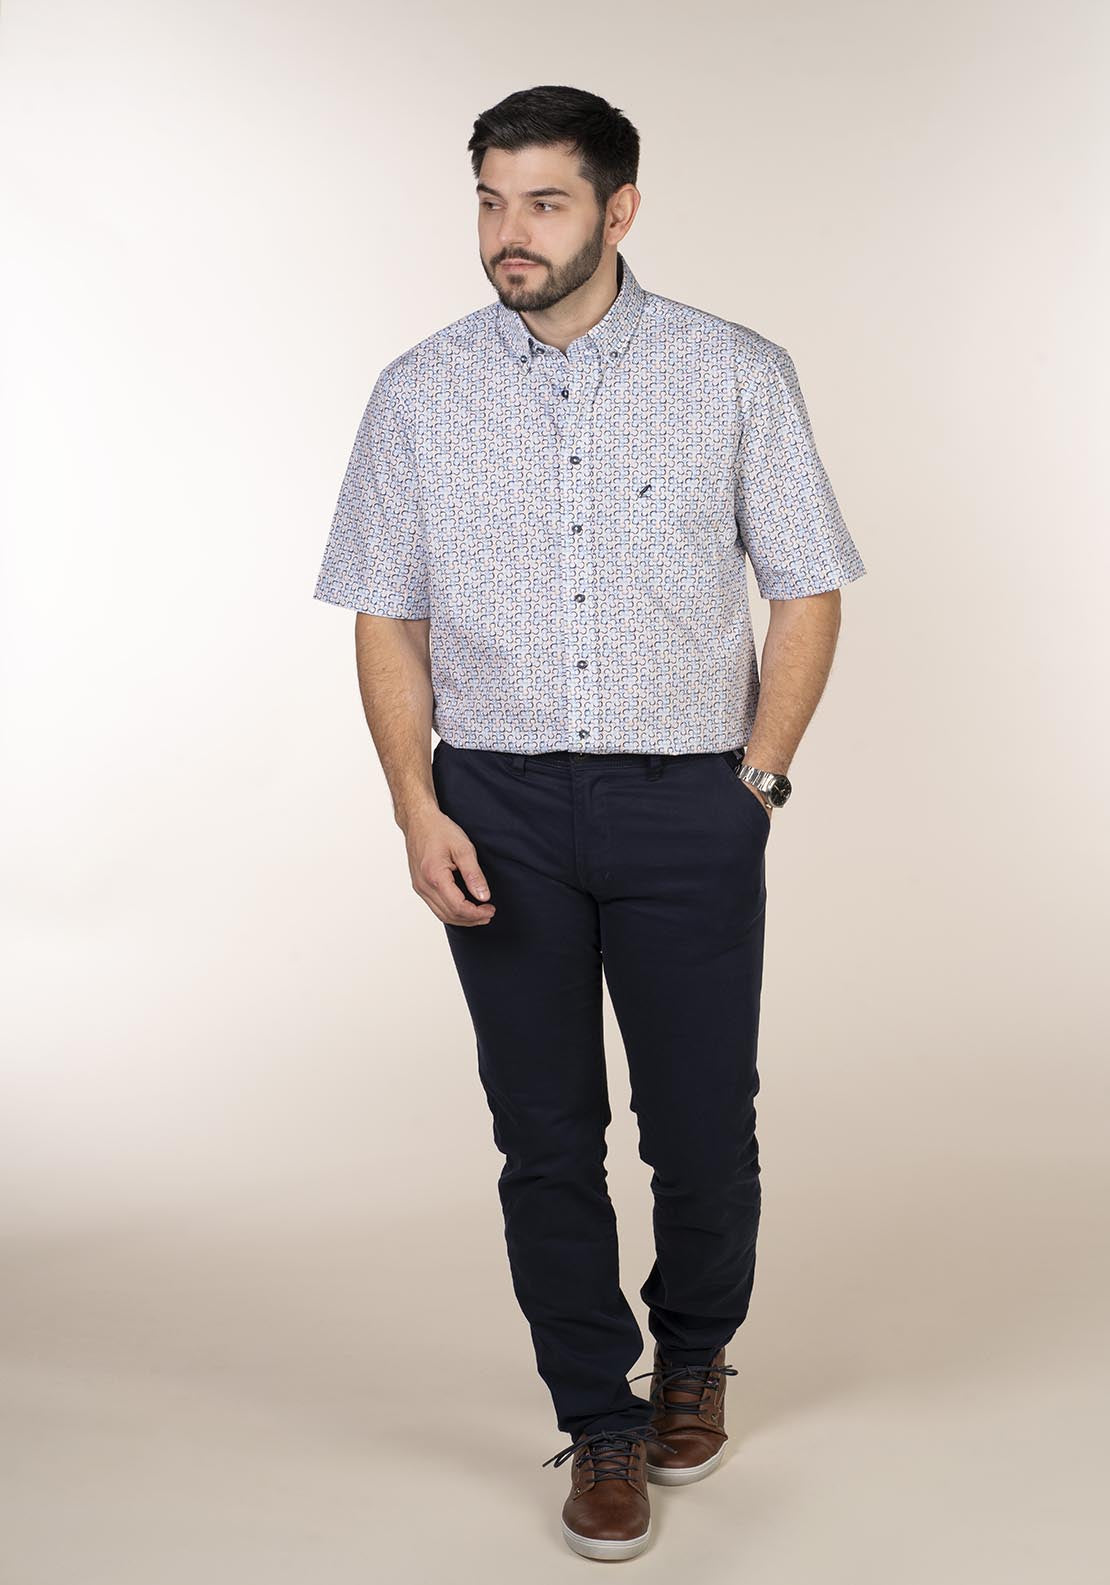 Yeats Casual Patterned Short Sleeve Shirt 2 Shaws Department Stores